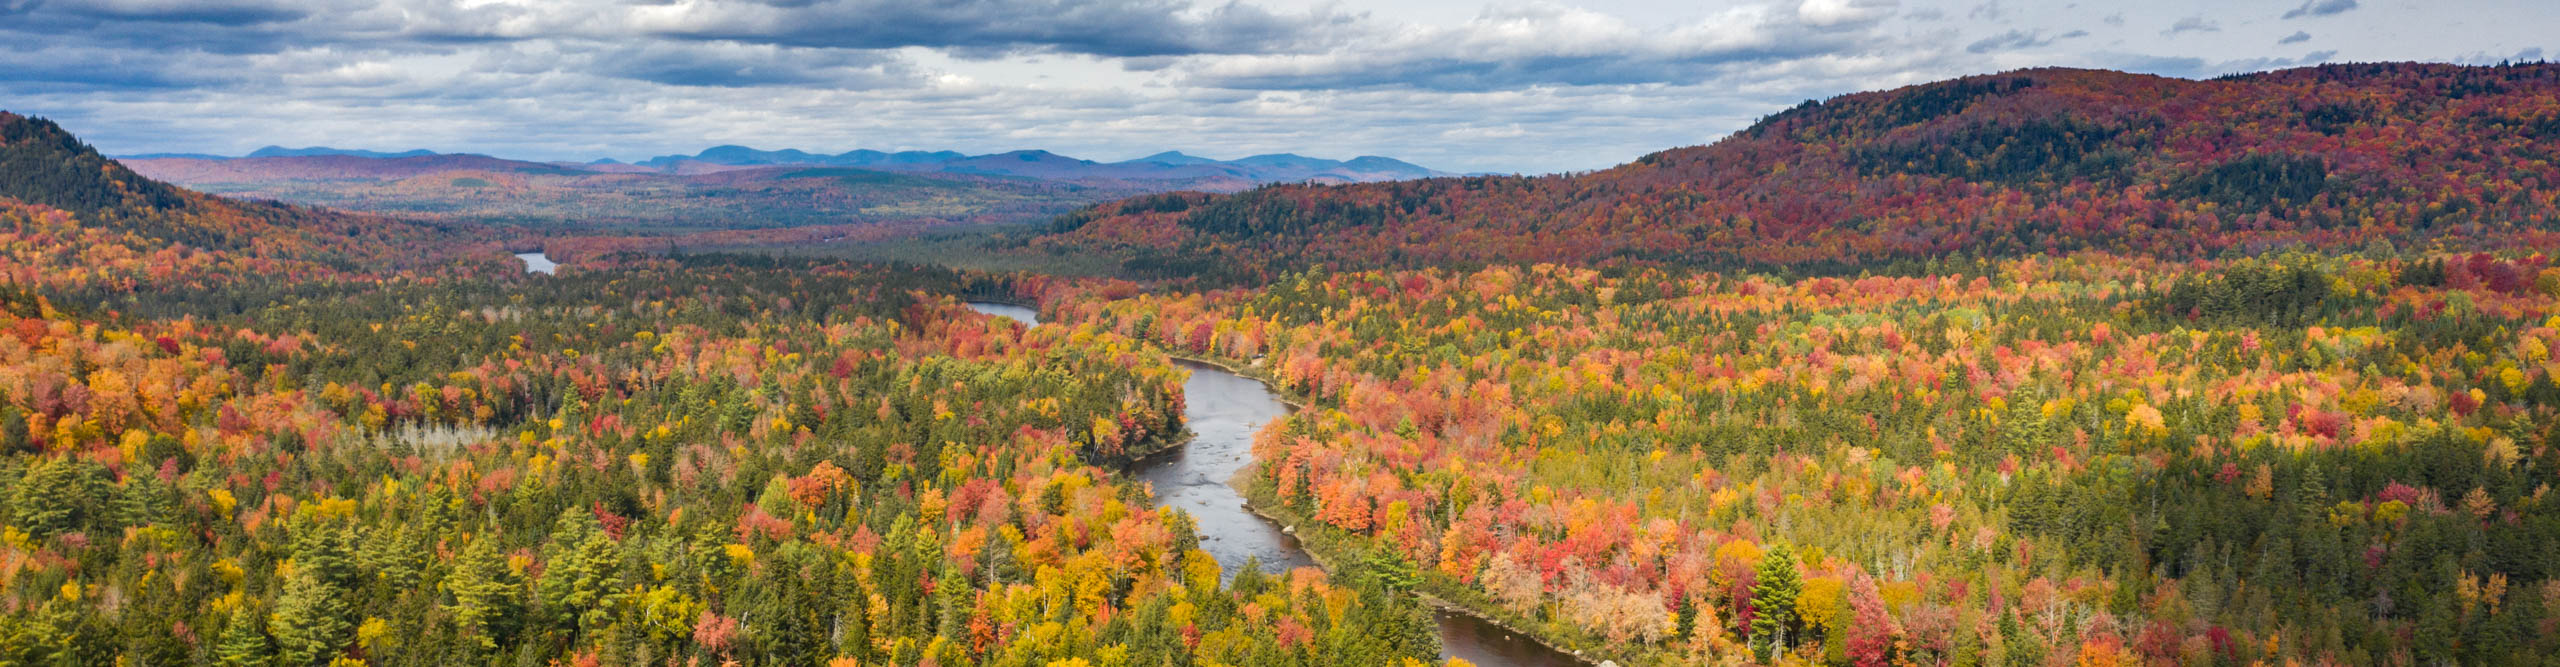 View of Dead River autumn landscape, with orange, green and red trees, Maine,United States,USA